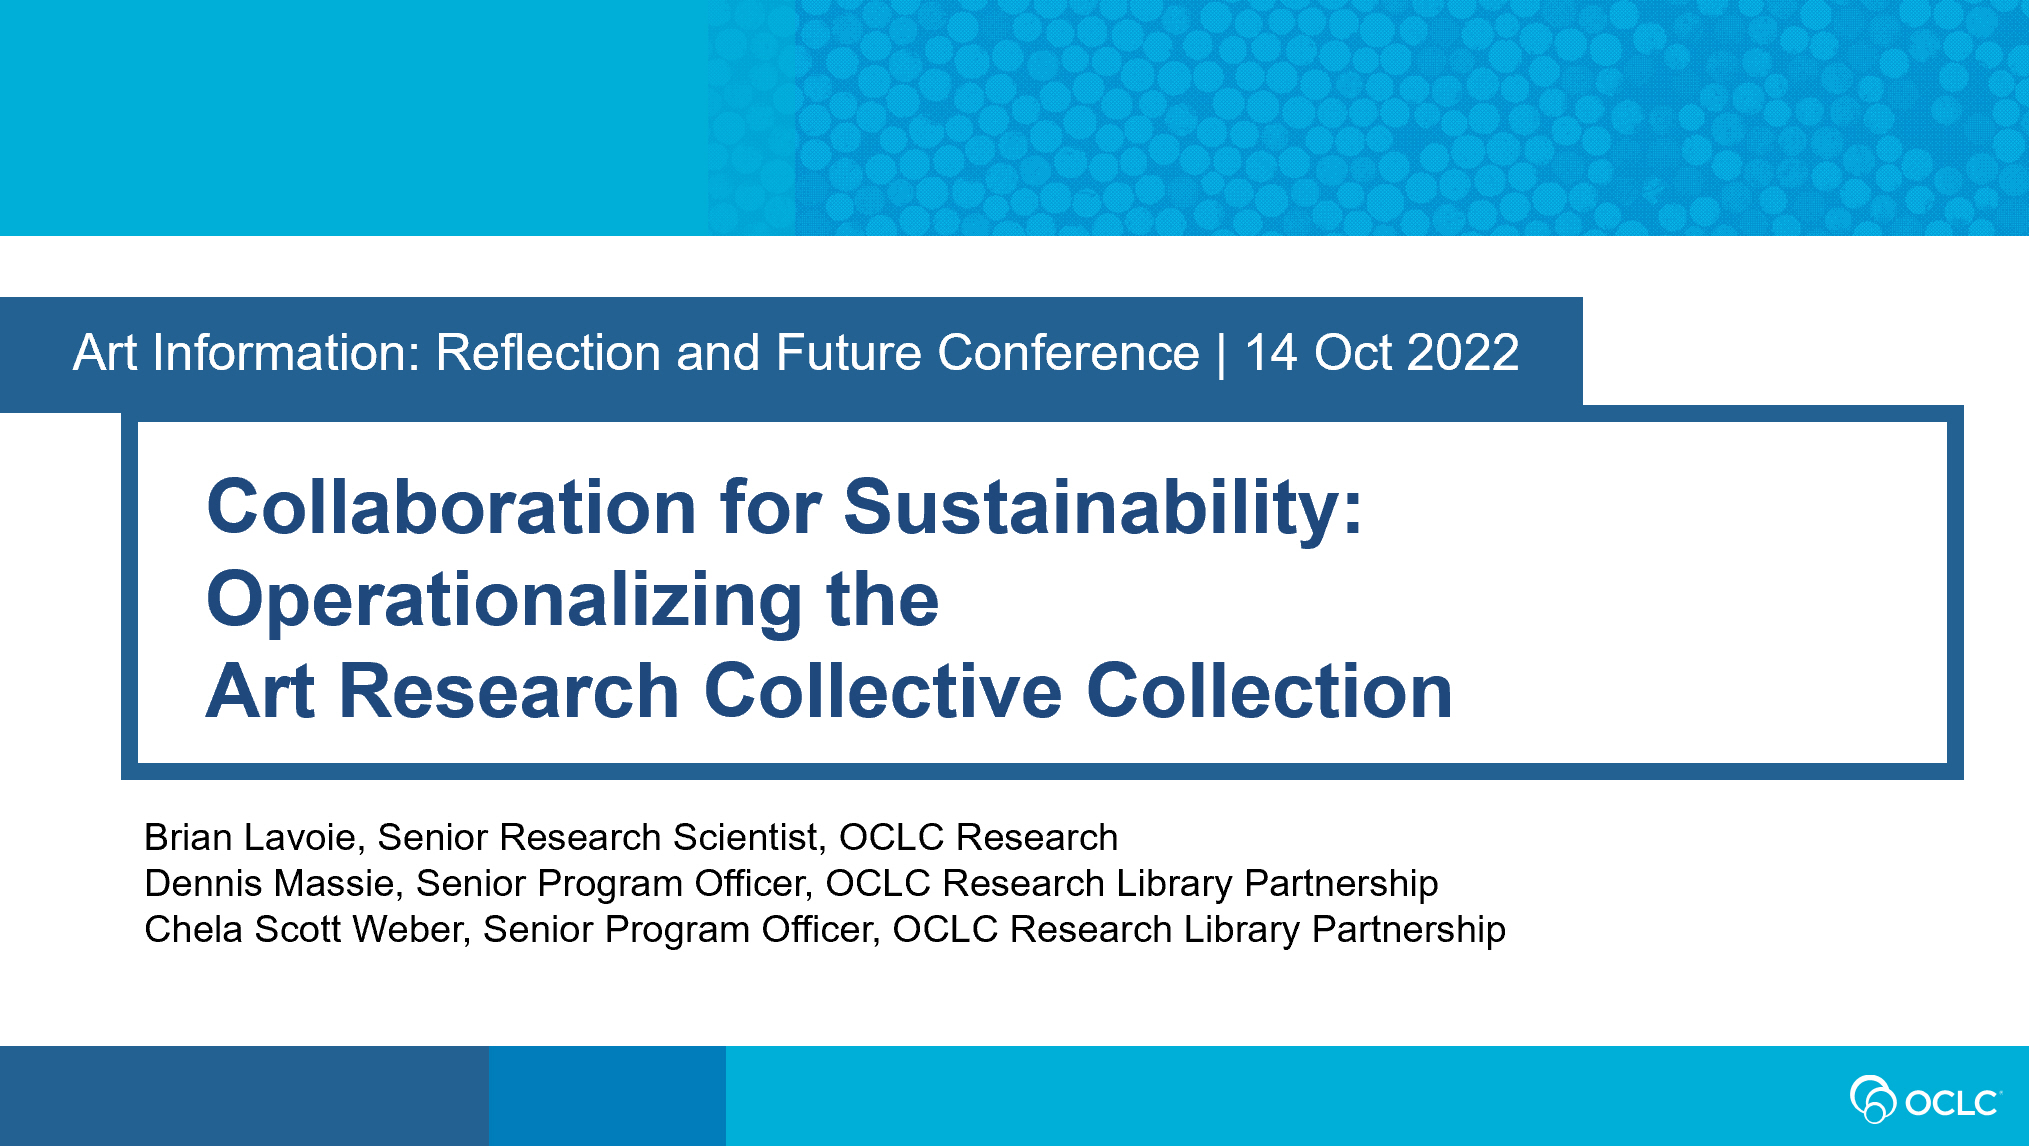 Collaboration for sustainability: Operationalizing the Art Research Collective Collection